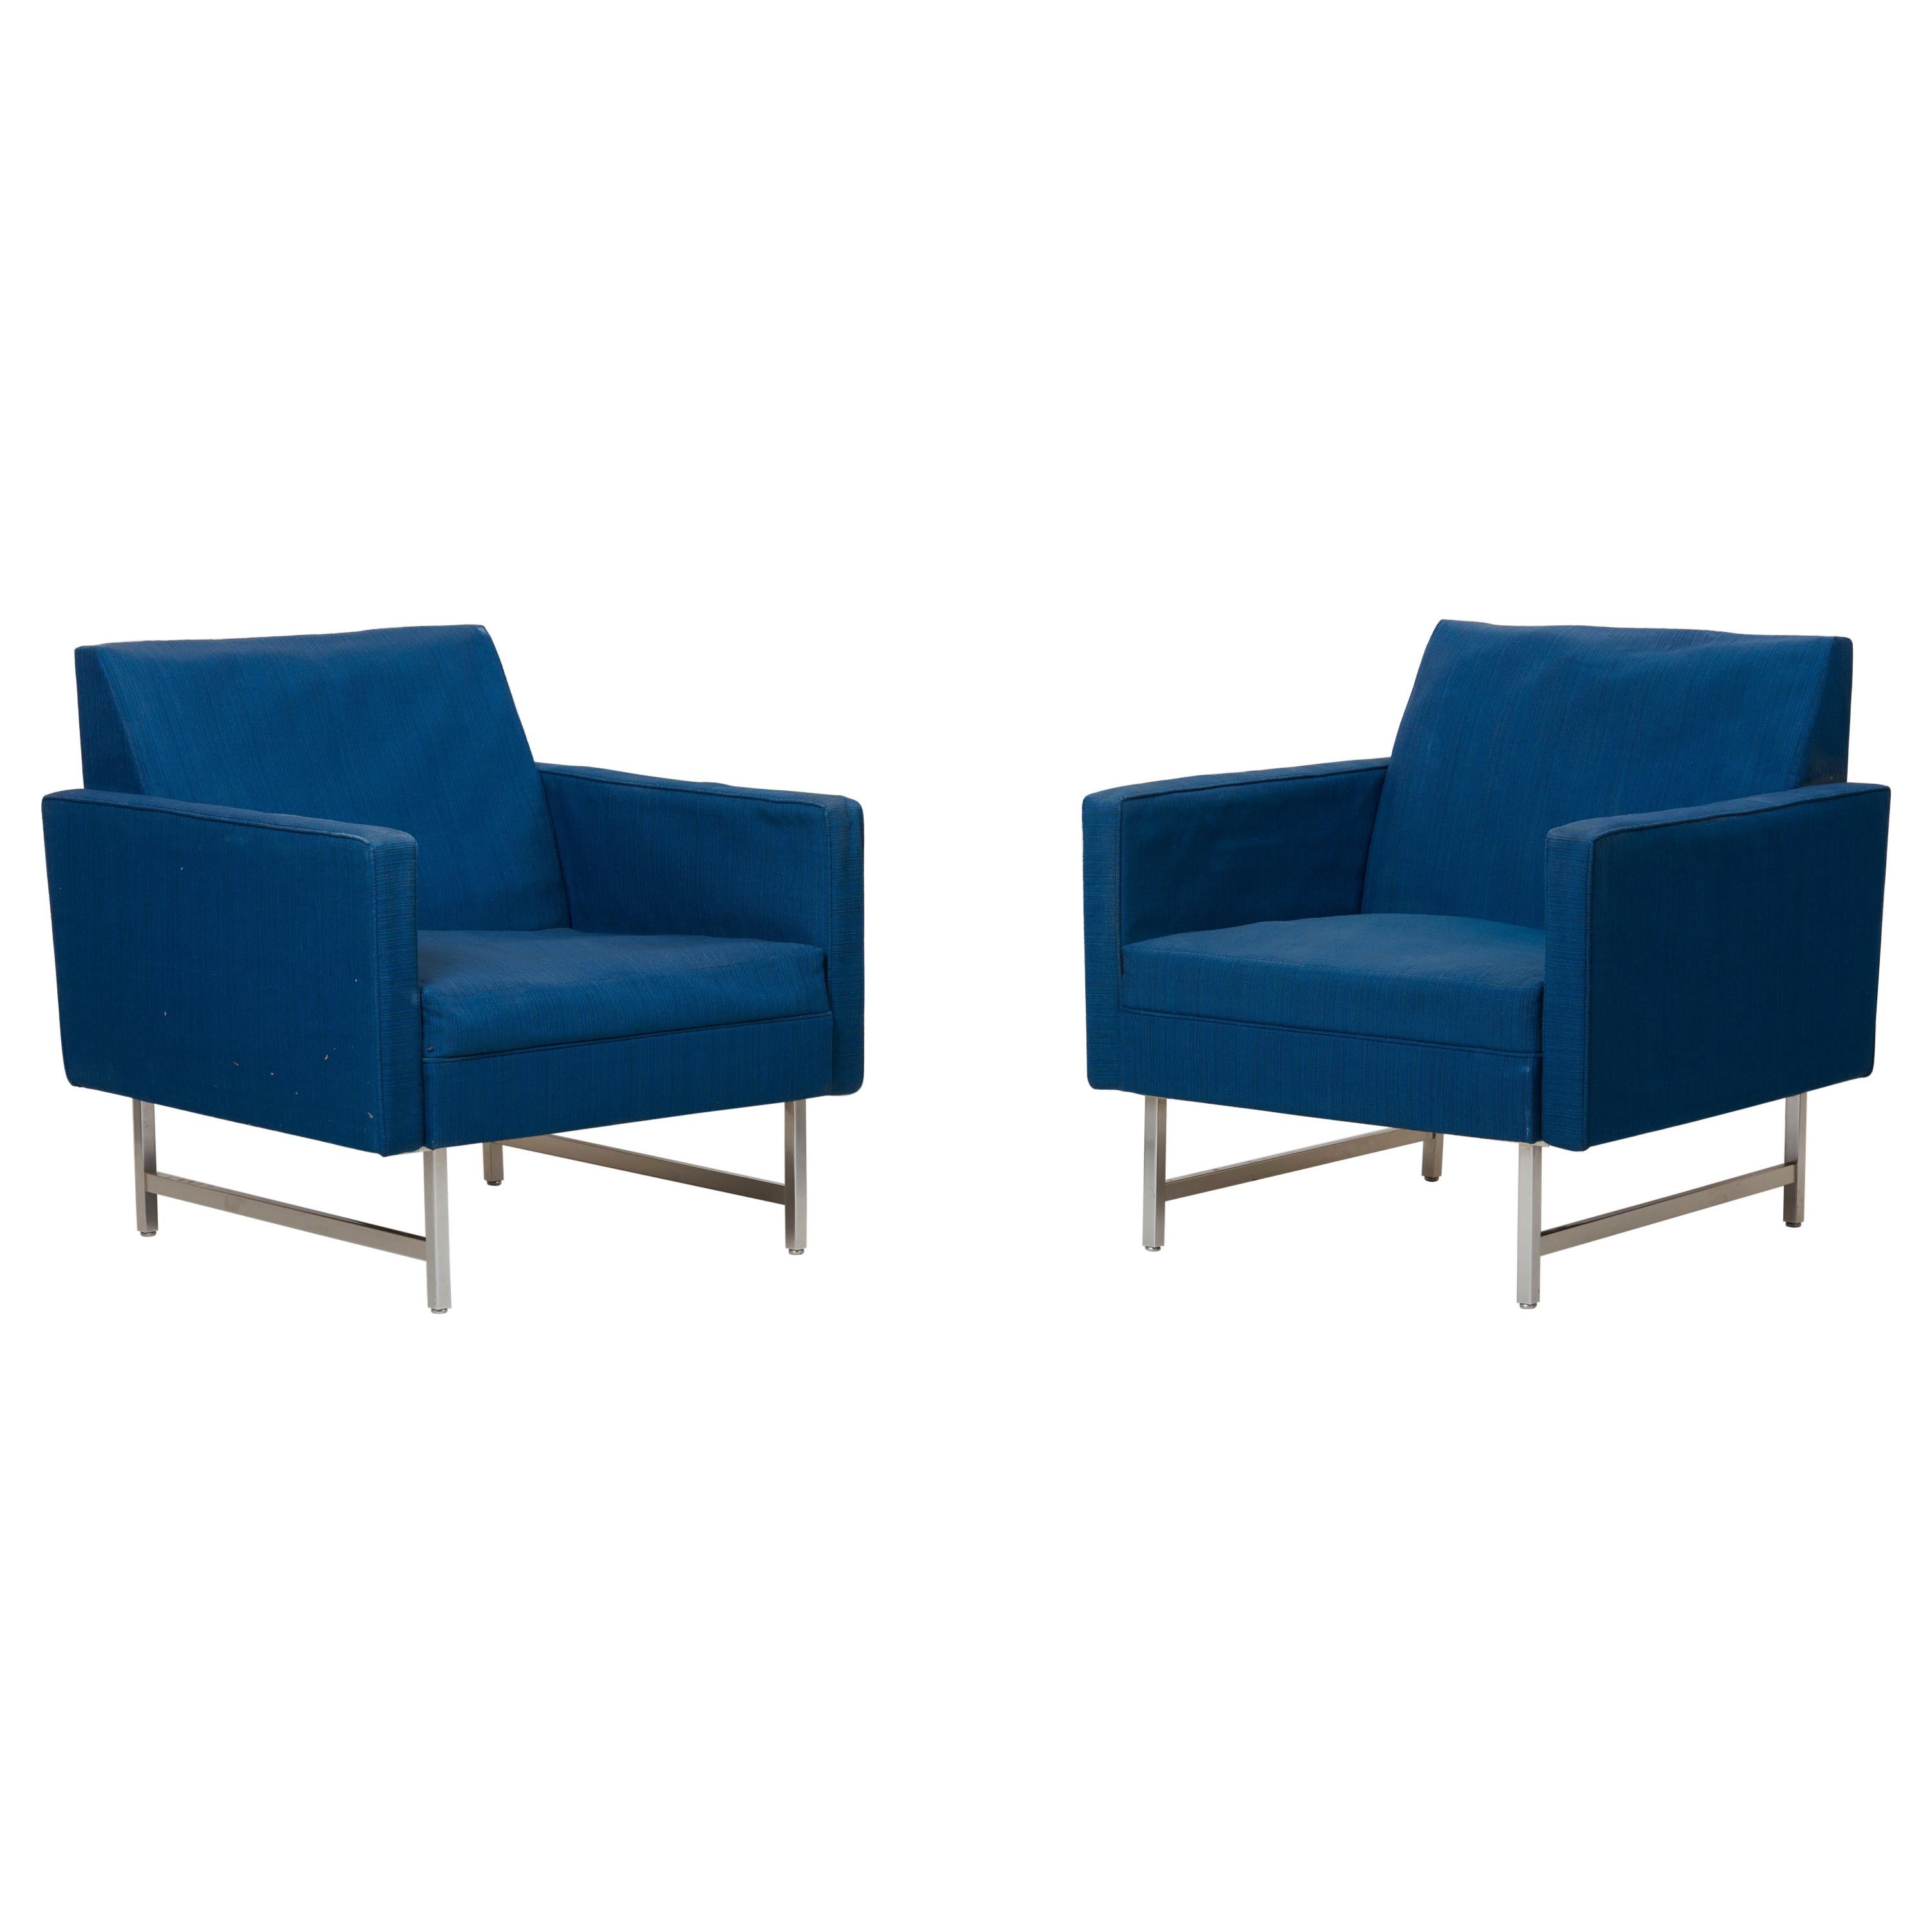 Pair of Lounge Chairs by Paul McCobb for Directional upholstery needed